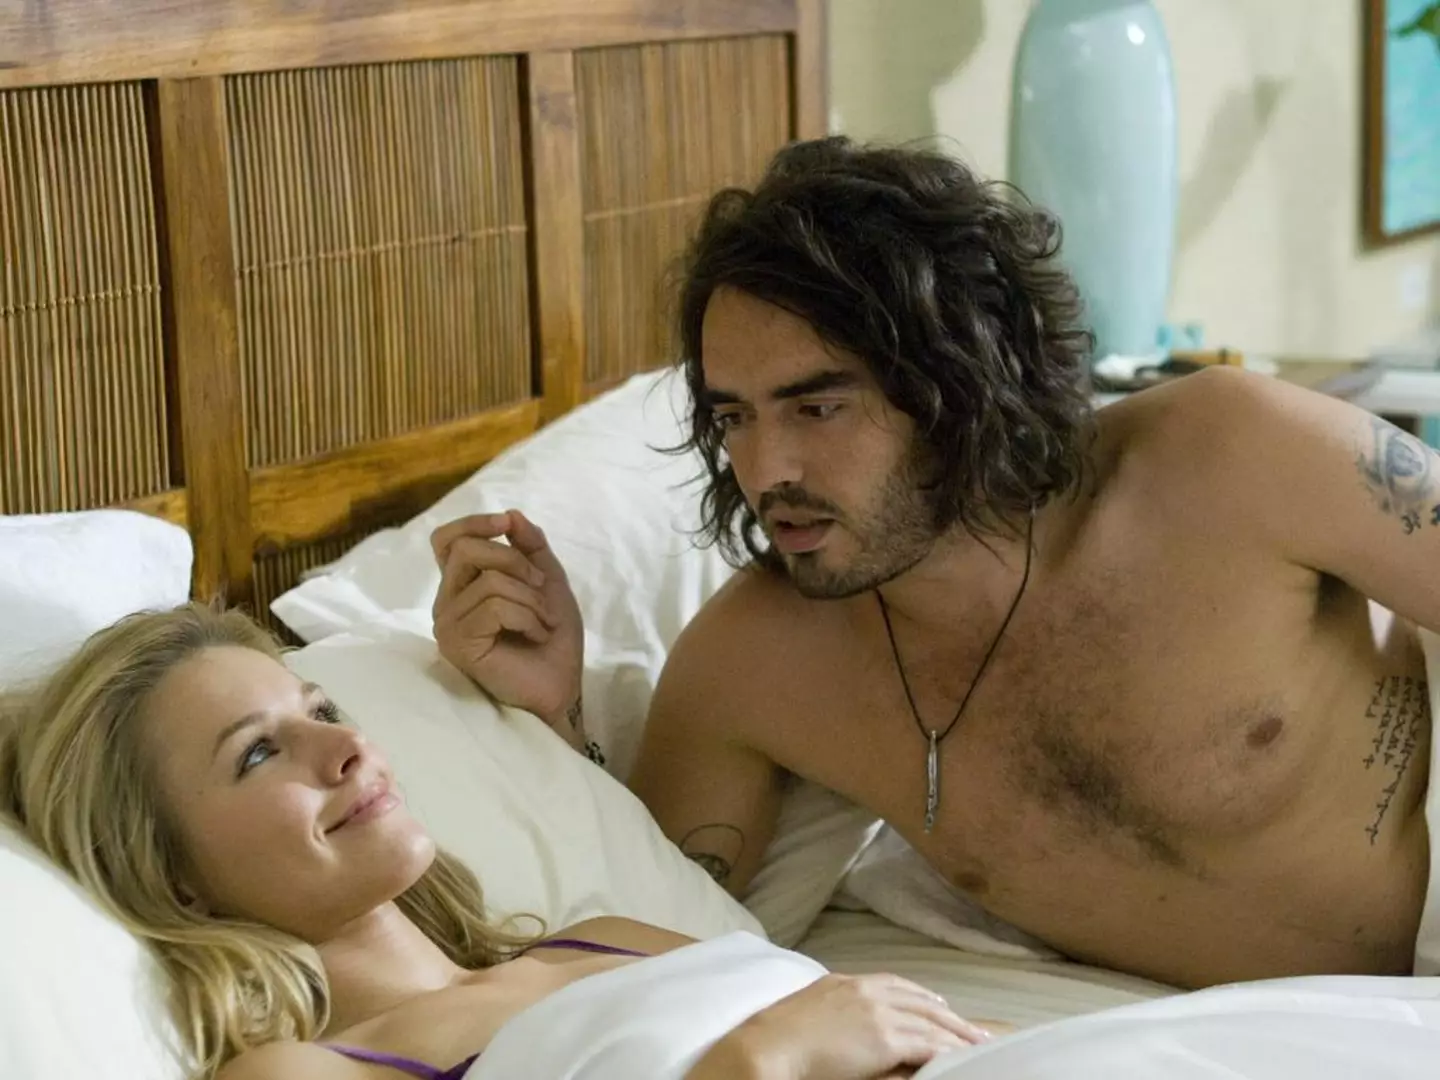 Kristen Bell and Russell Brand in Forgetting Sarah Marshall.